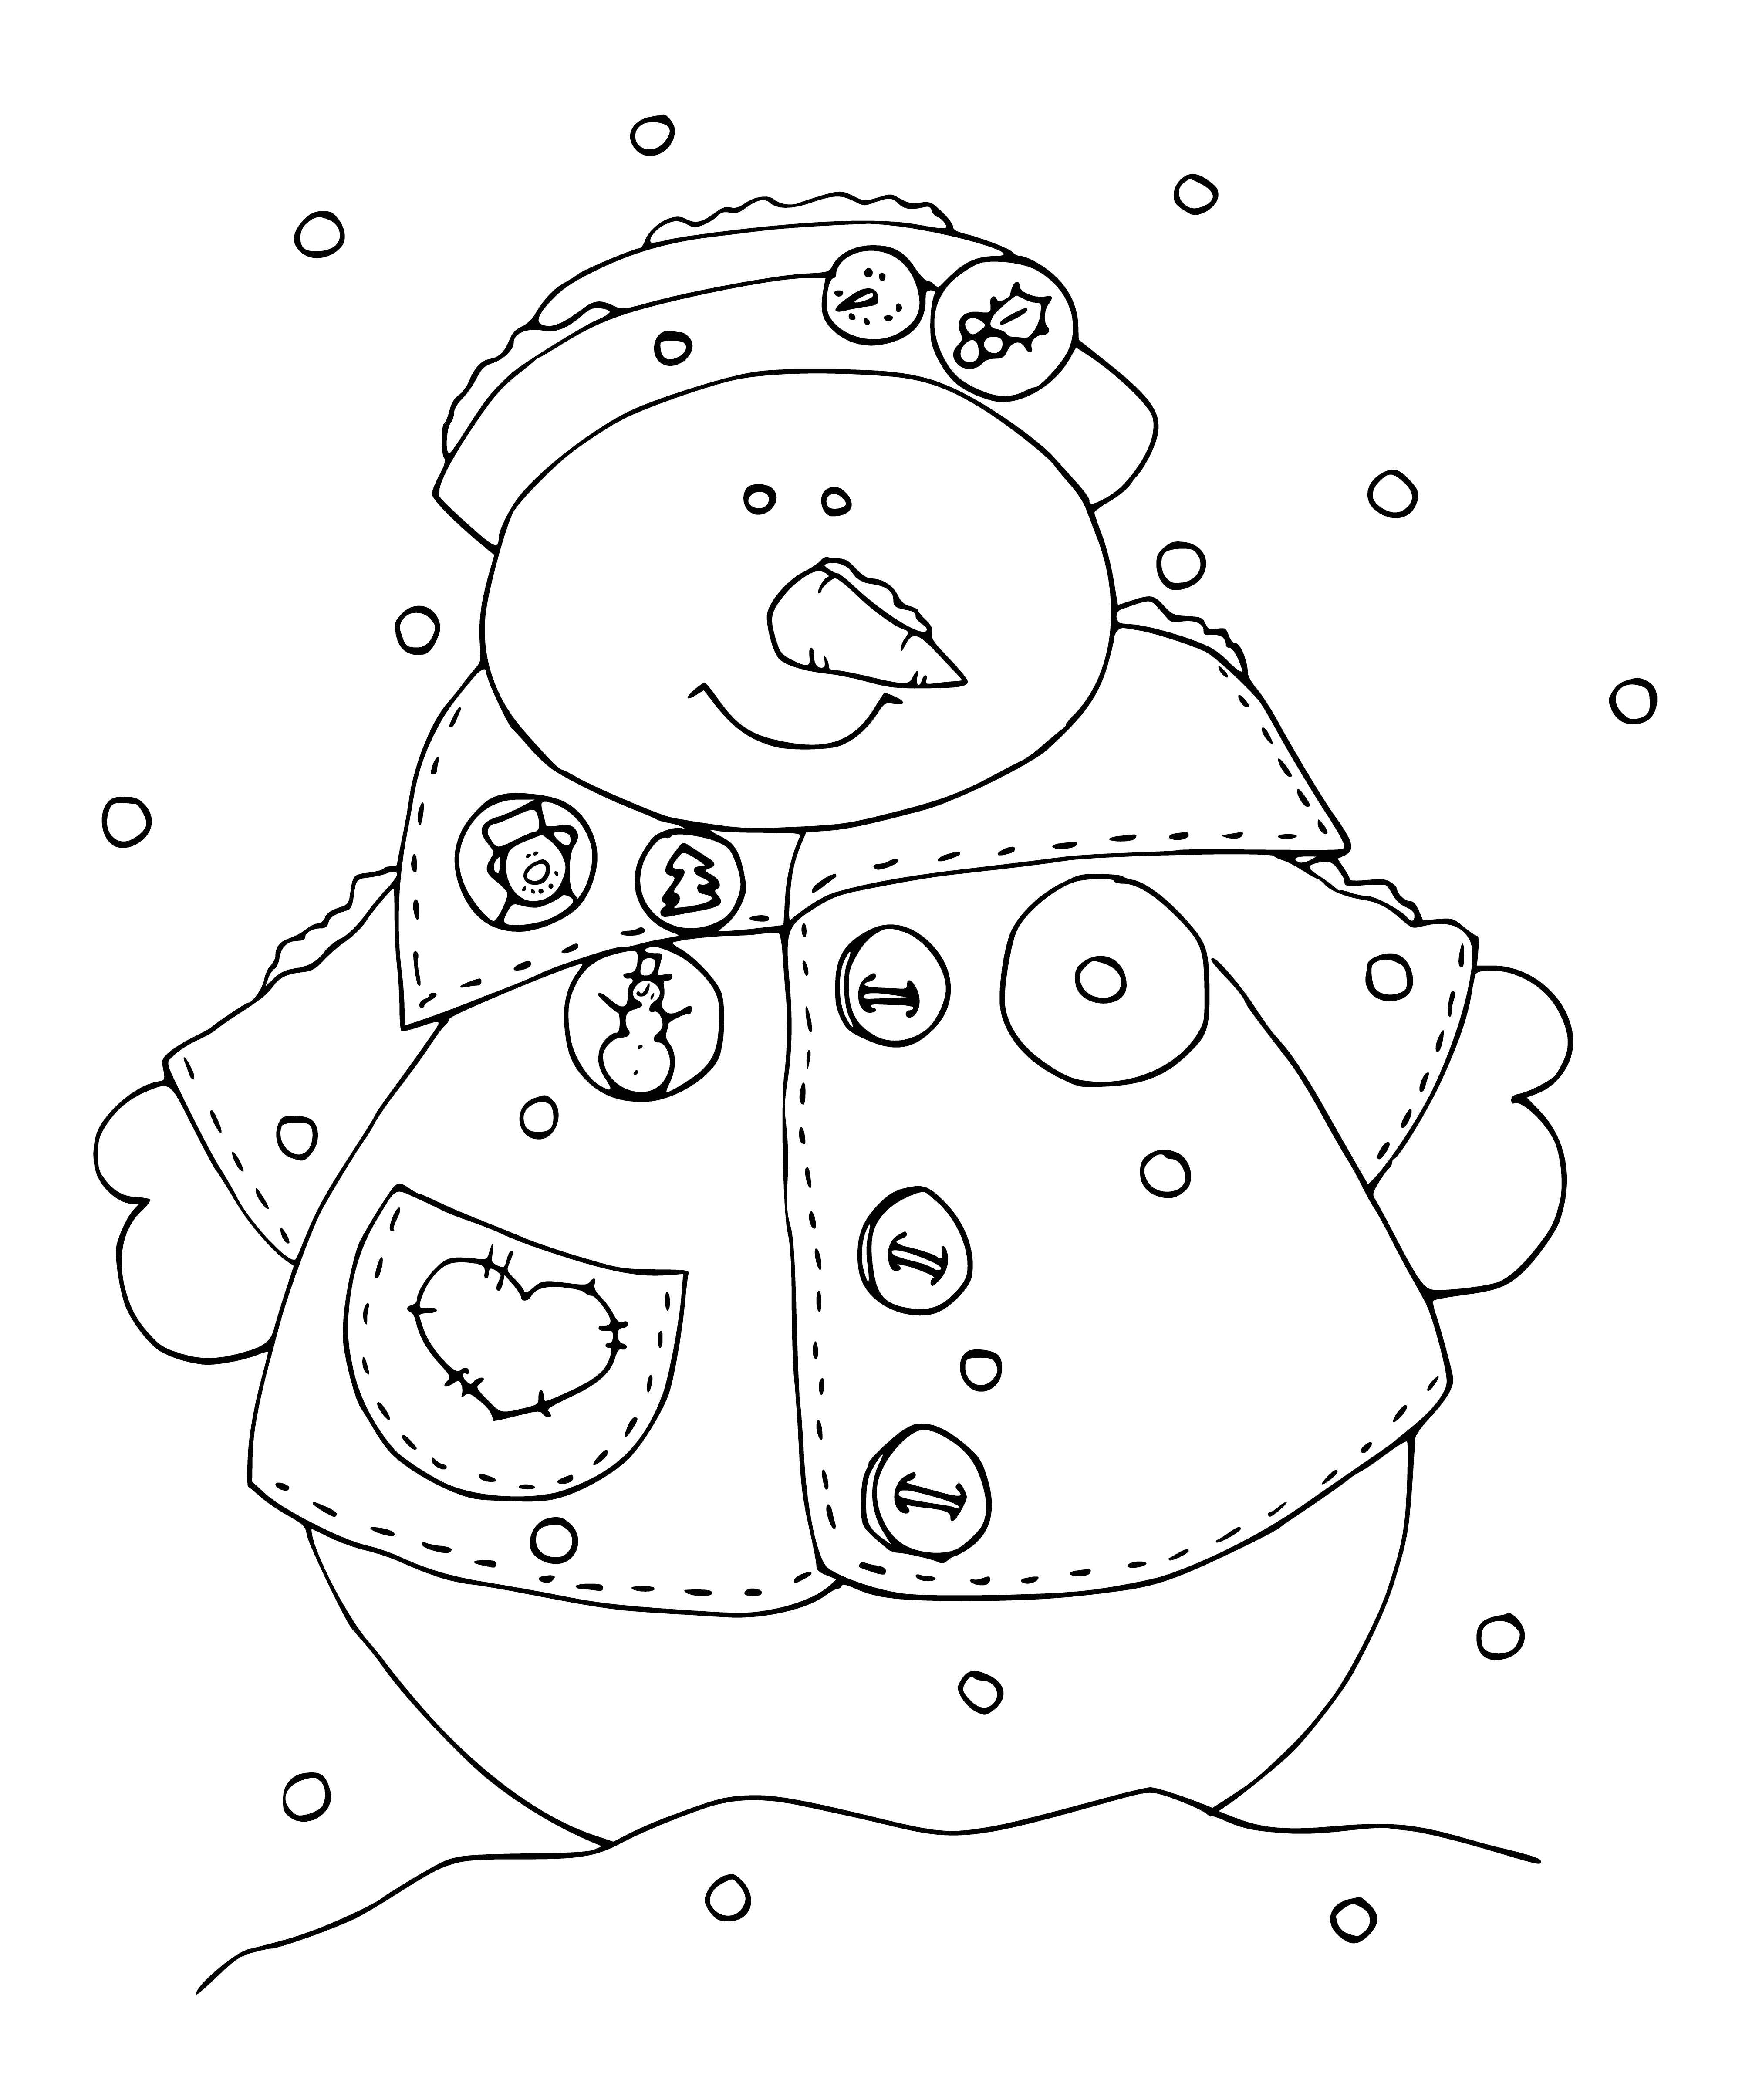 coloring page: 3 snowmen w/carrot noses, hats, & sticks in right hands.